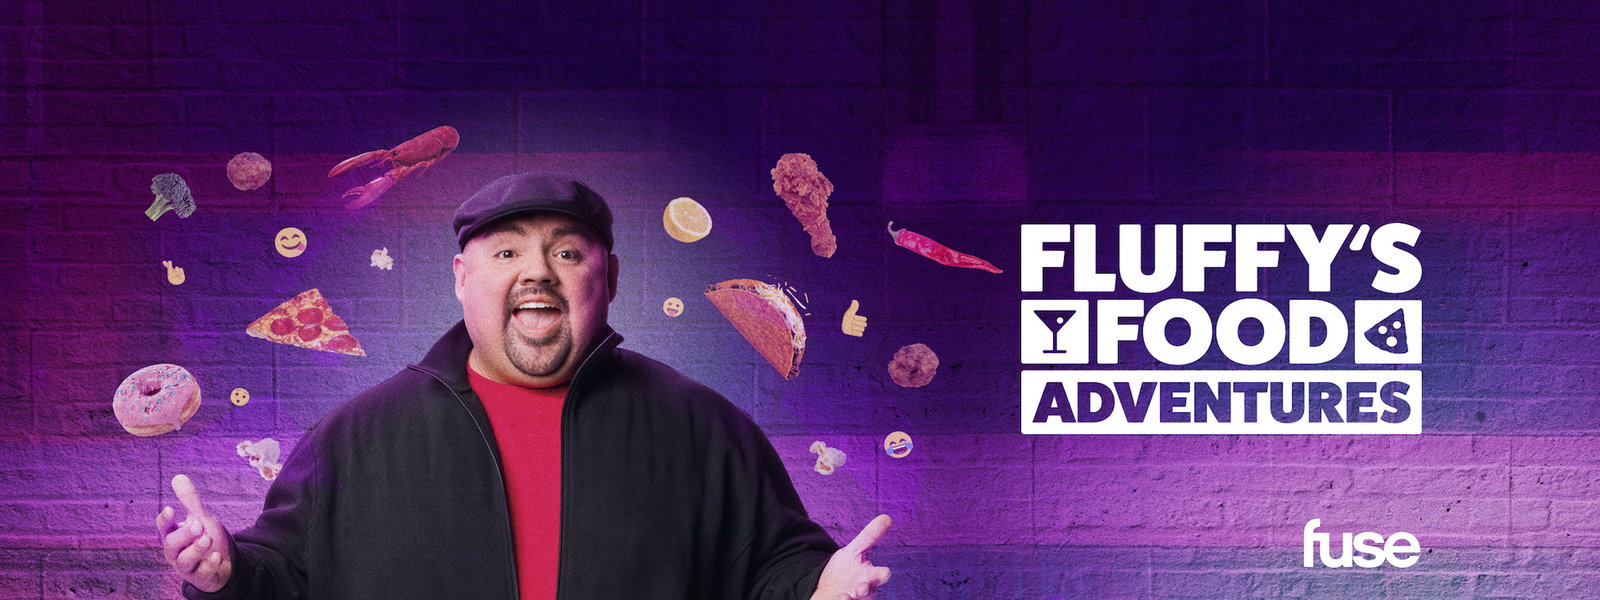 When Does Fluffy's Food Adventures Season 4 Start? Fuse Release Date